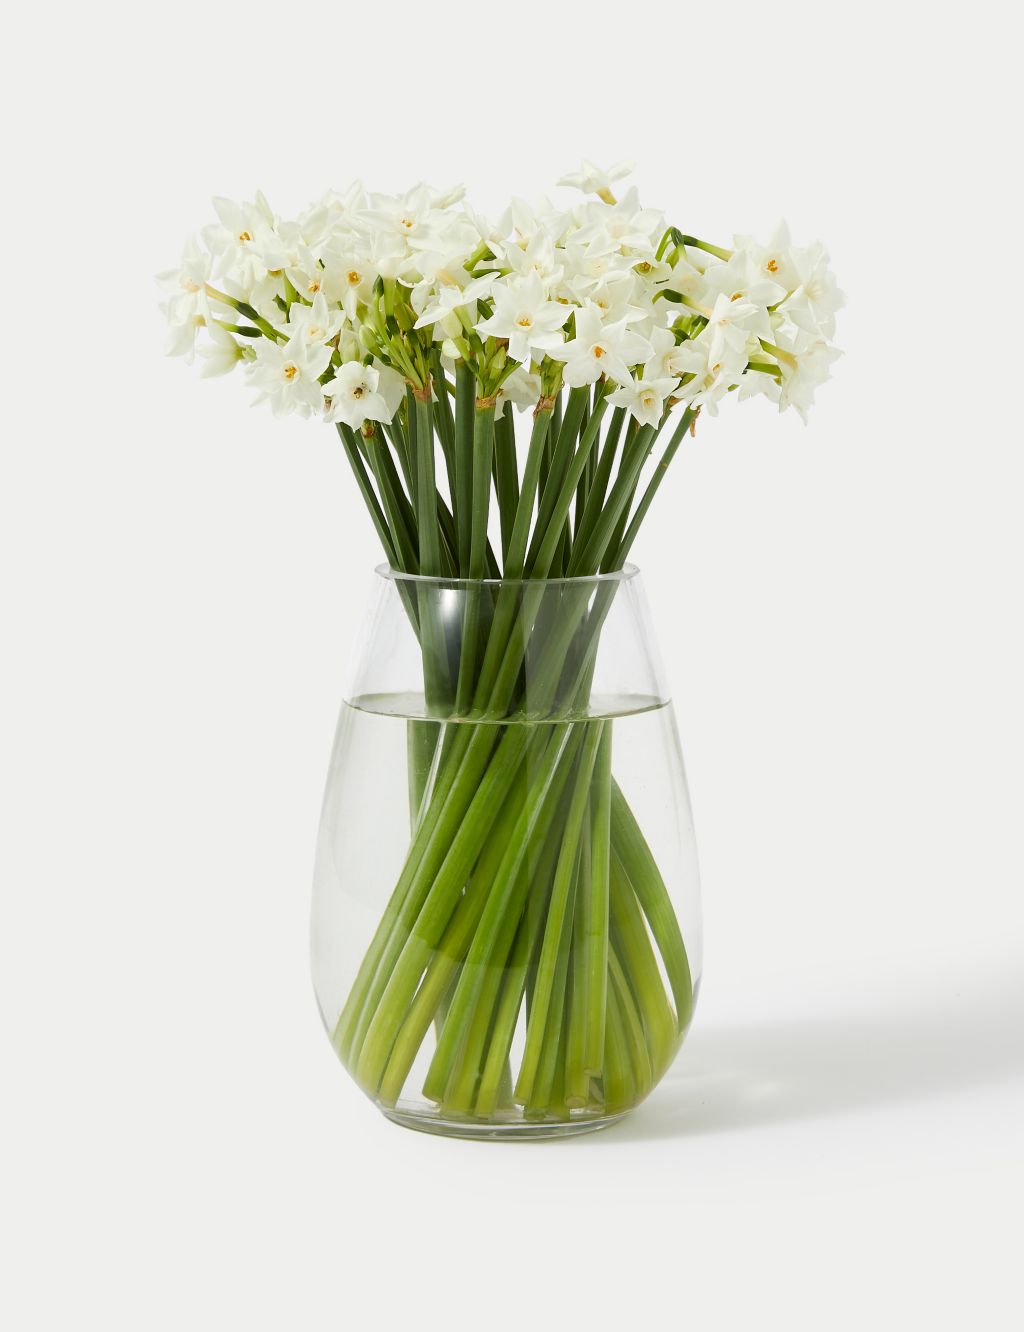 British Sweetly Scented Narcissi Bouquet image 3